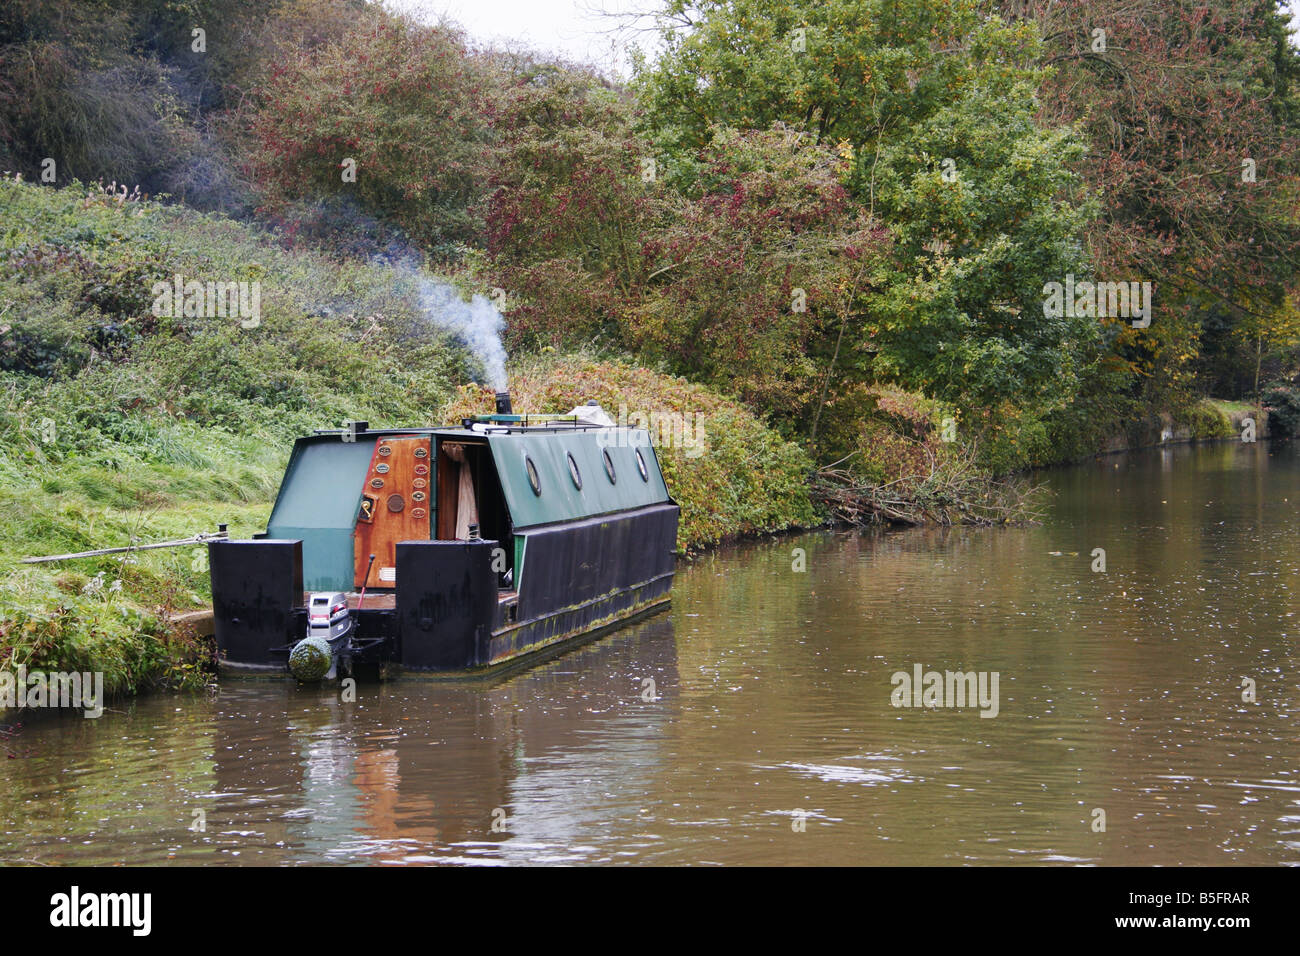 Narrowboat on the Grand Union Canal, Bedfordshire Stock Photo